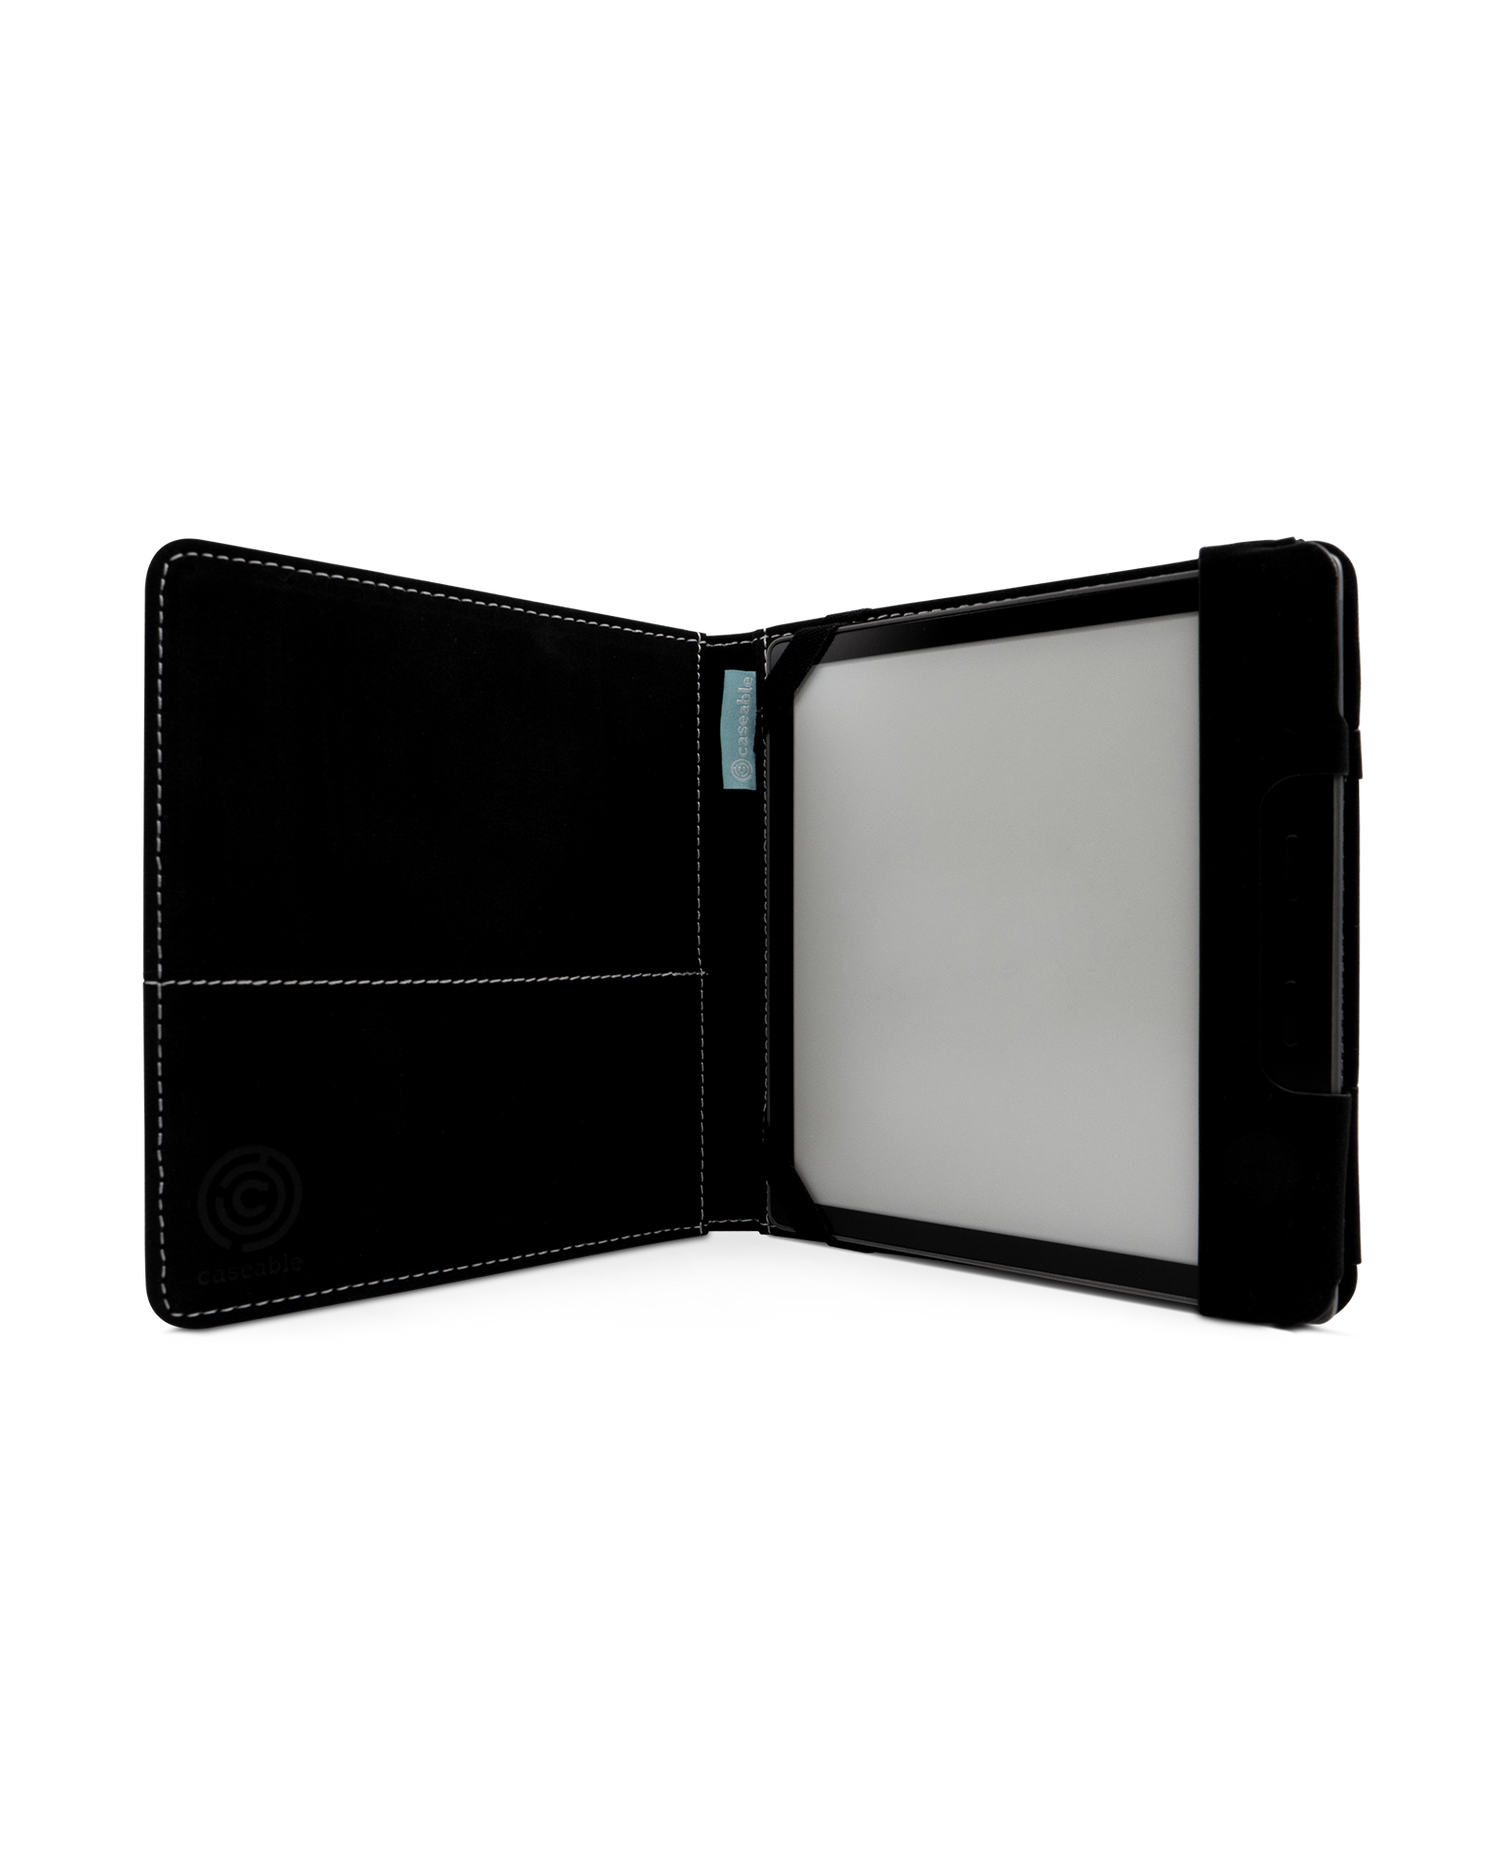 Eclipse eReader Case for tolino vision 6: Opened interior view